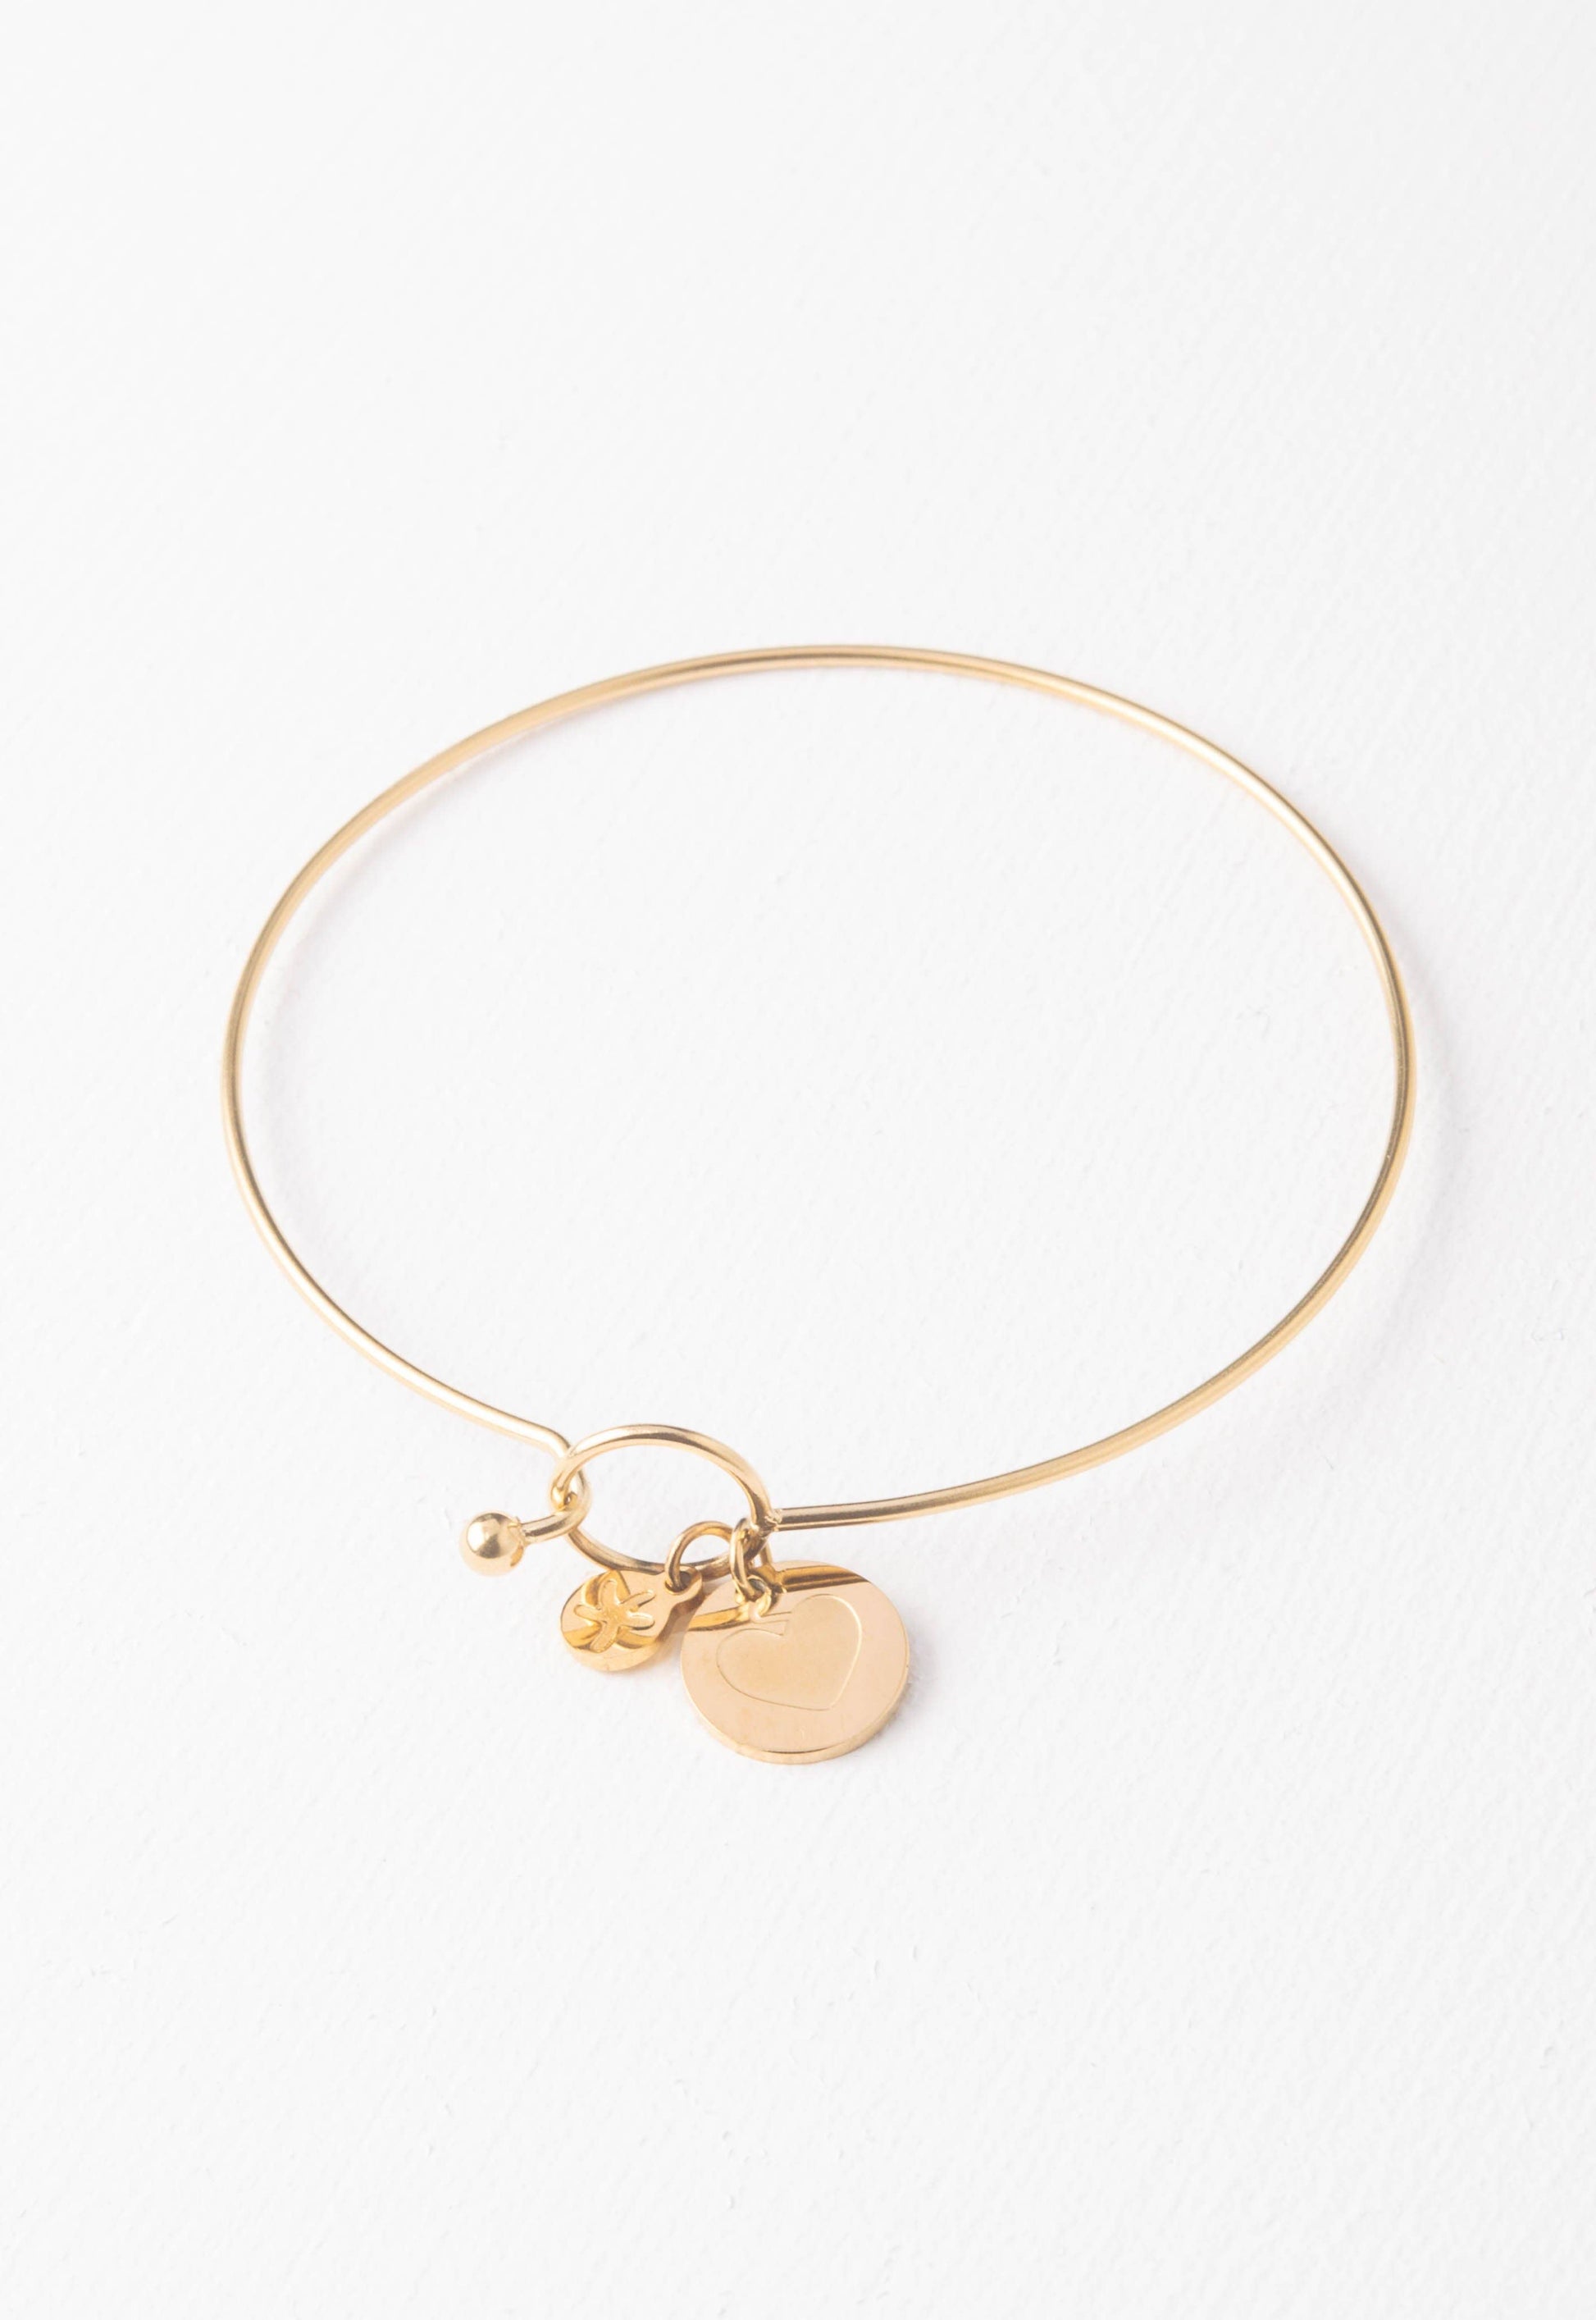 NYC Flower Delivery - Starfish Project's Forever Bracelet